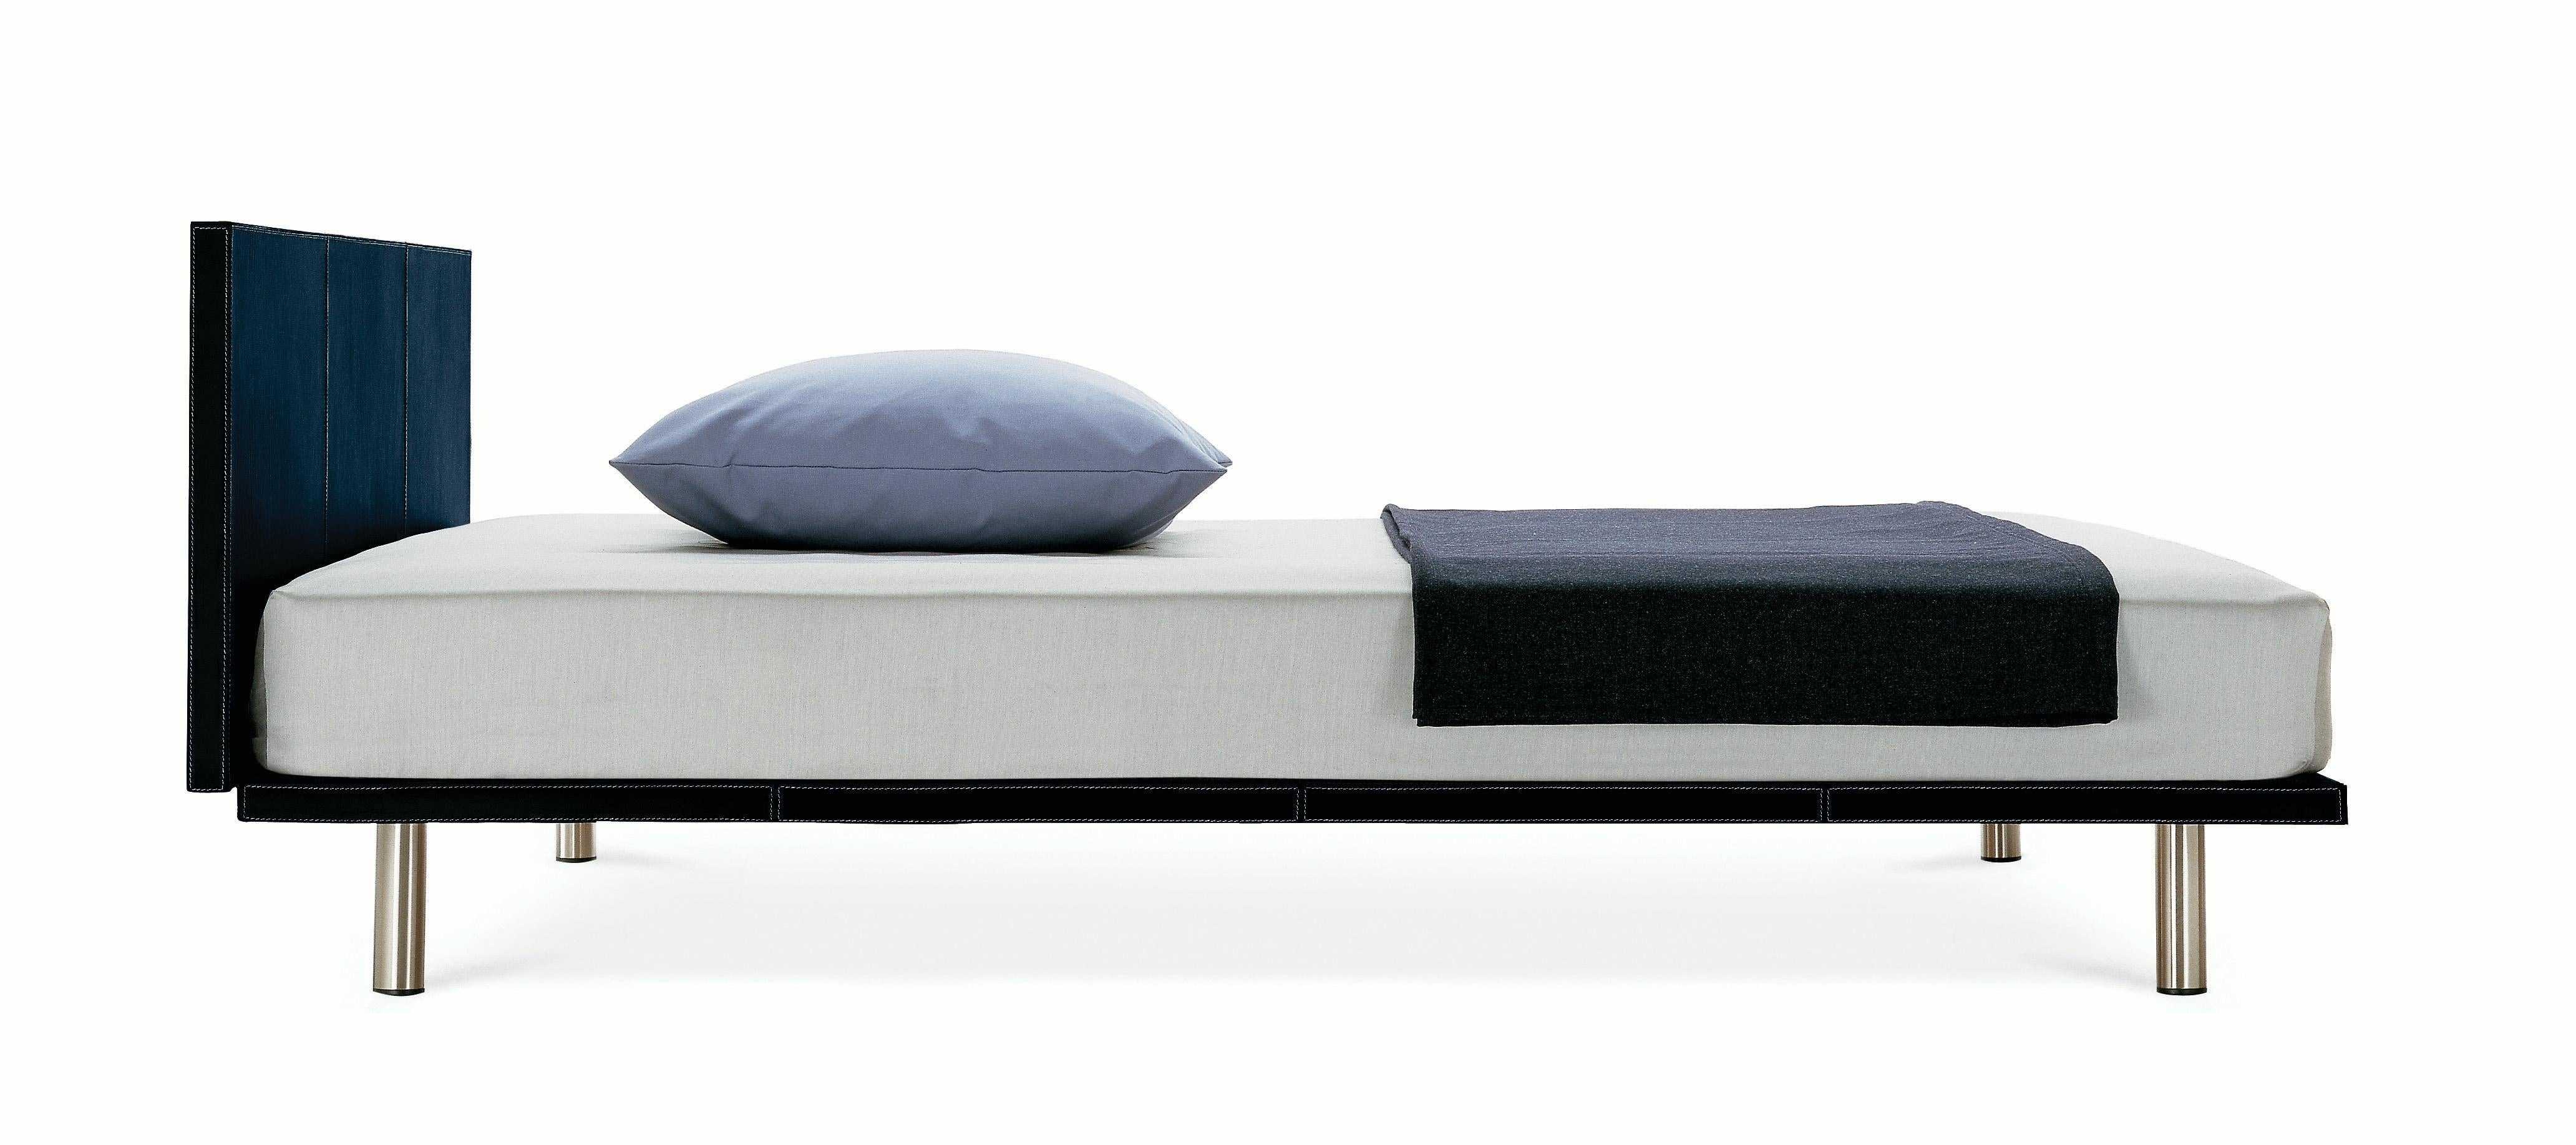 Zanotta Large Milano Bed in Blue Cuoio Cowhide with Steel Frame by De Pas, D'Urbino, Lomazzi

Steel frame with natural varnished bent beech strips. Steel feet, with natural or black nickel-satin finish. The supplied feet allow three different